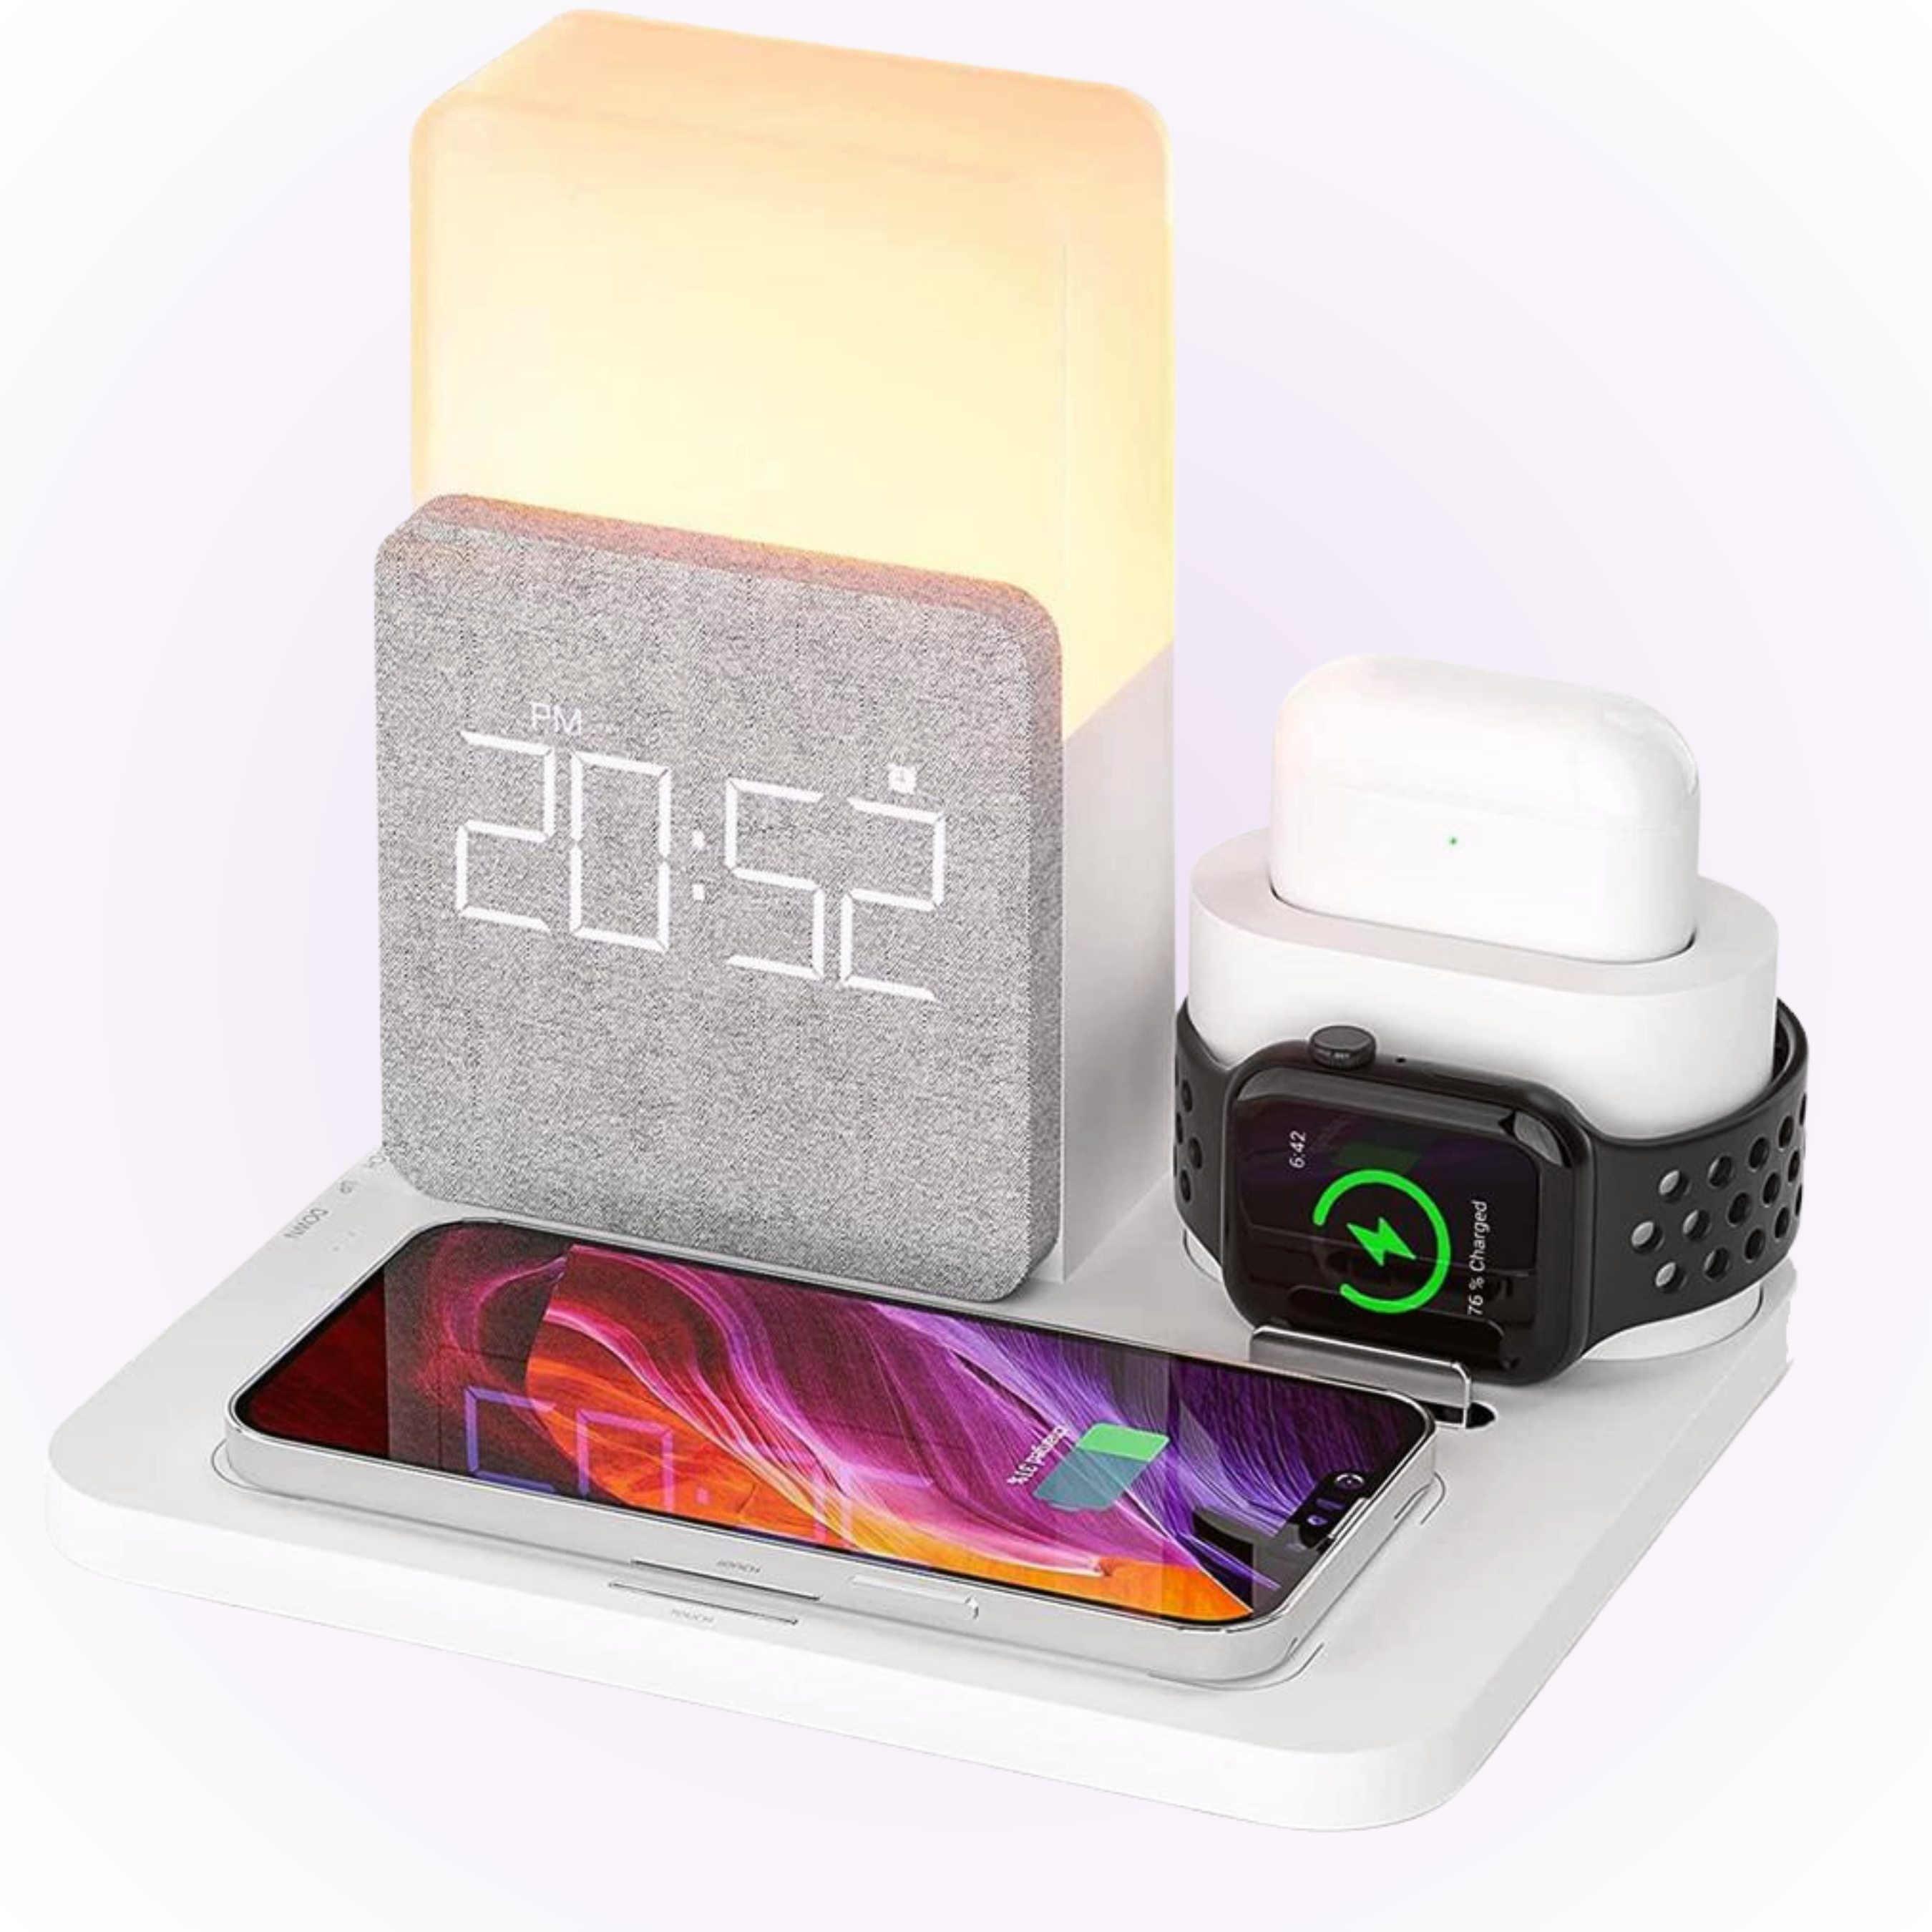 frost white alarm clock with wireless charging iphone, airpods and apple watch